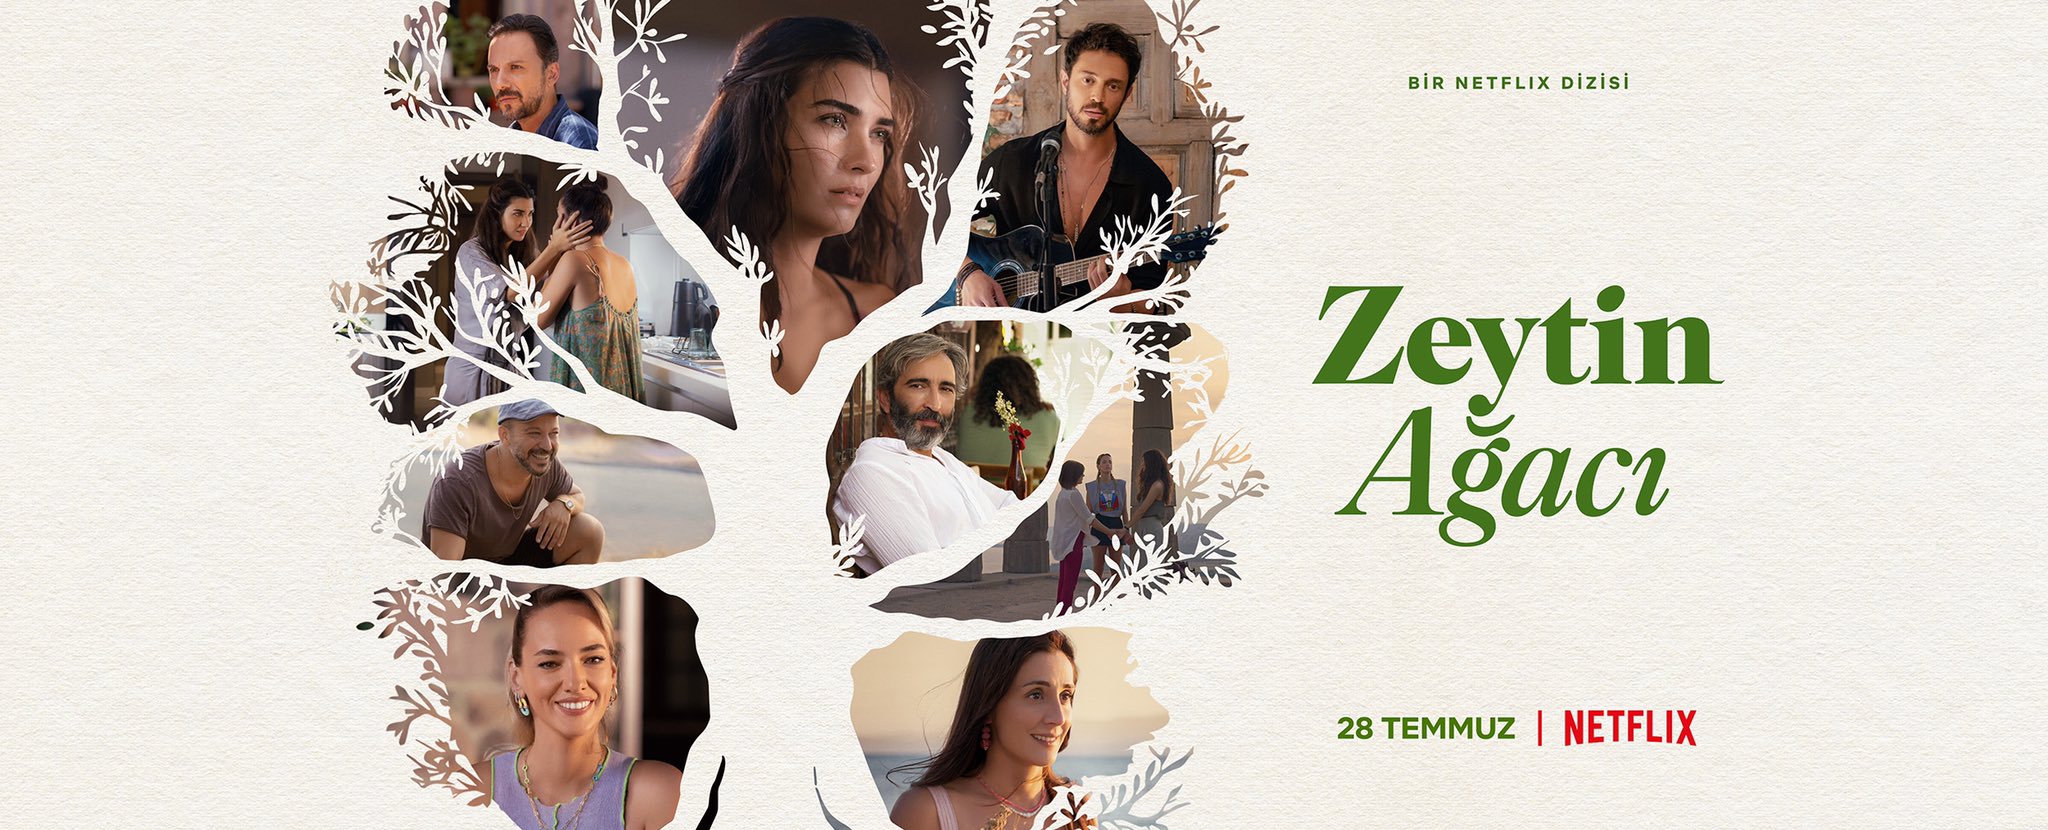 Netflix S Zeytin Agaci Series Shook The Trends In Its First Day